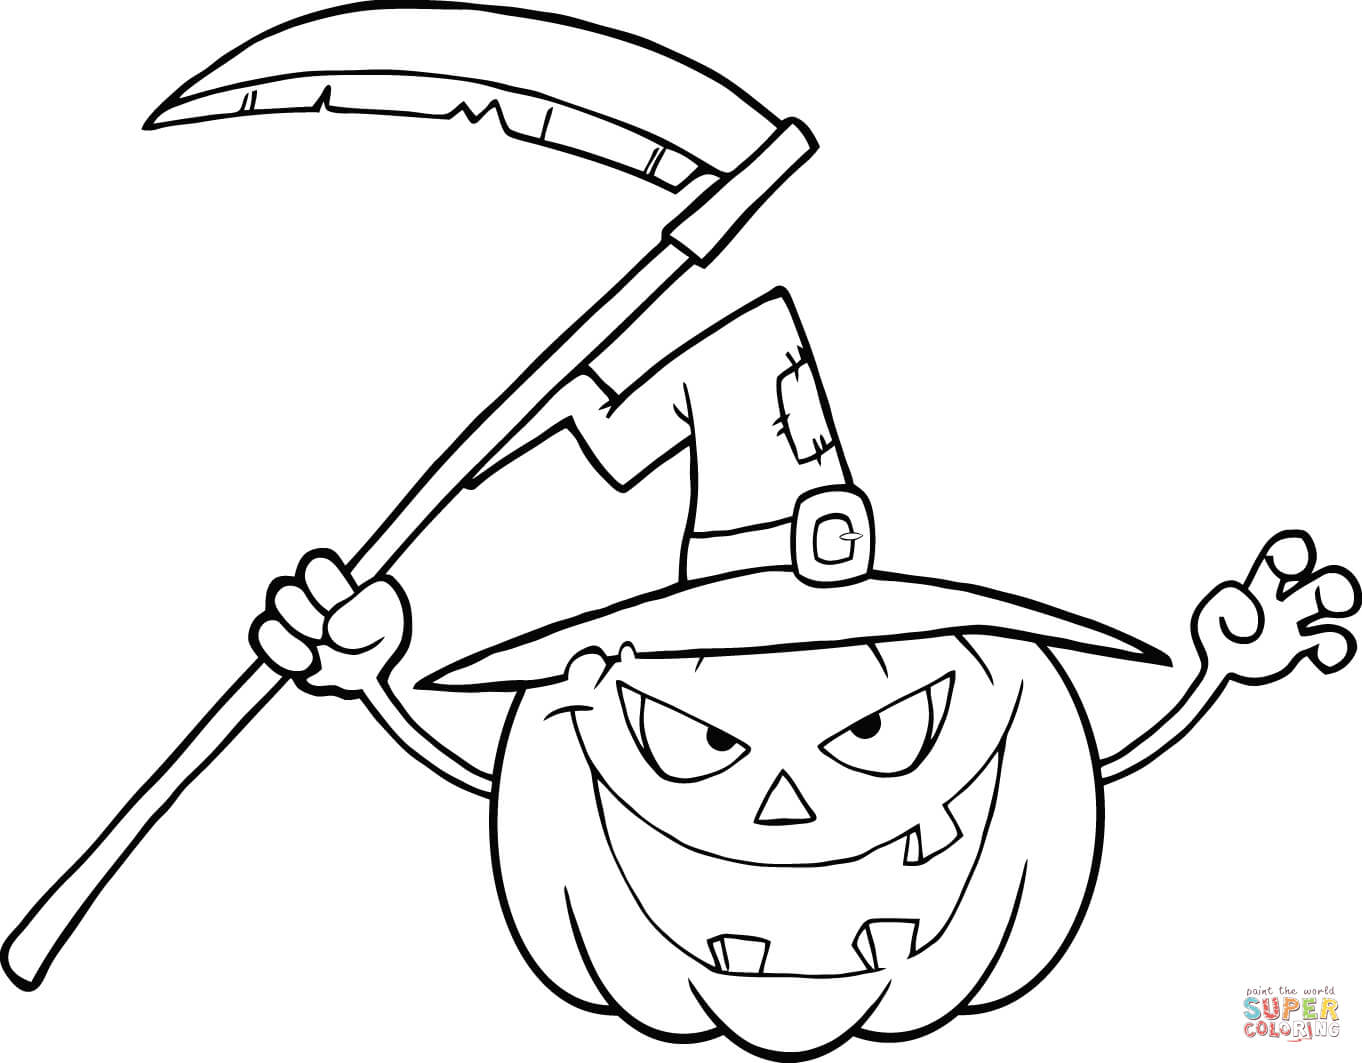 Halloween Pumpkin Coloring Pages Printables Scary Halloween Pumpkin With A Witch Hat And Scythe Coloring Page